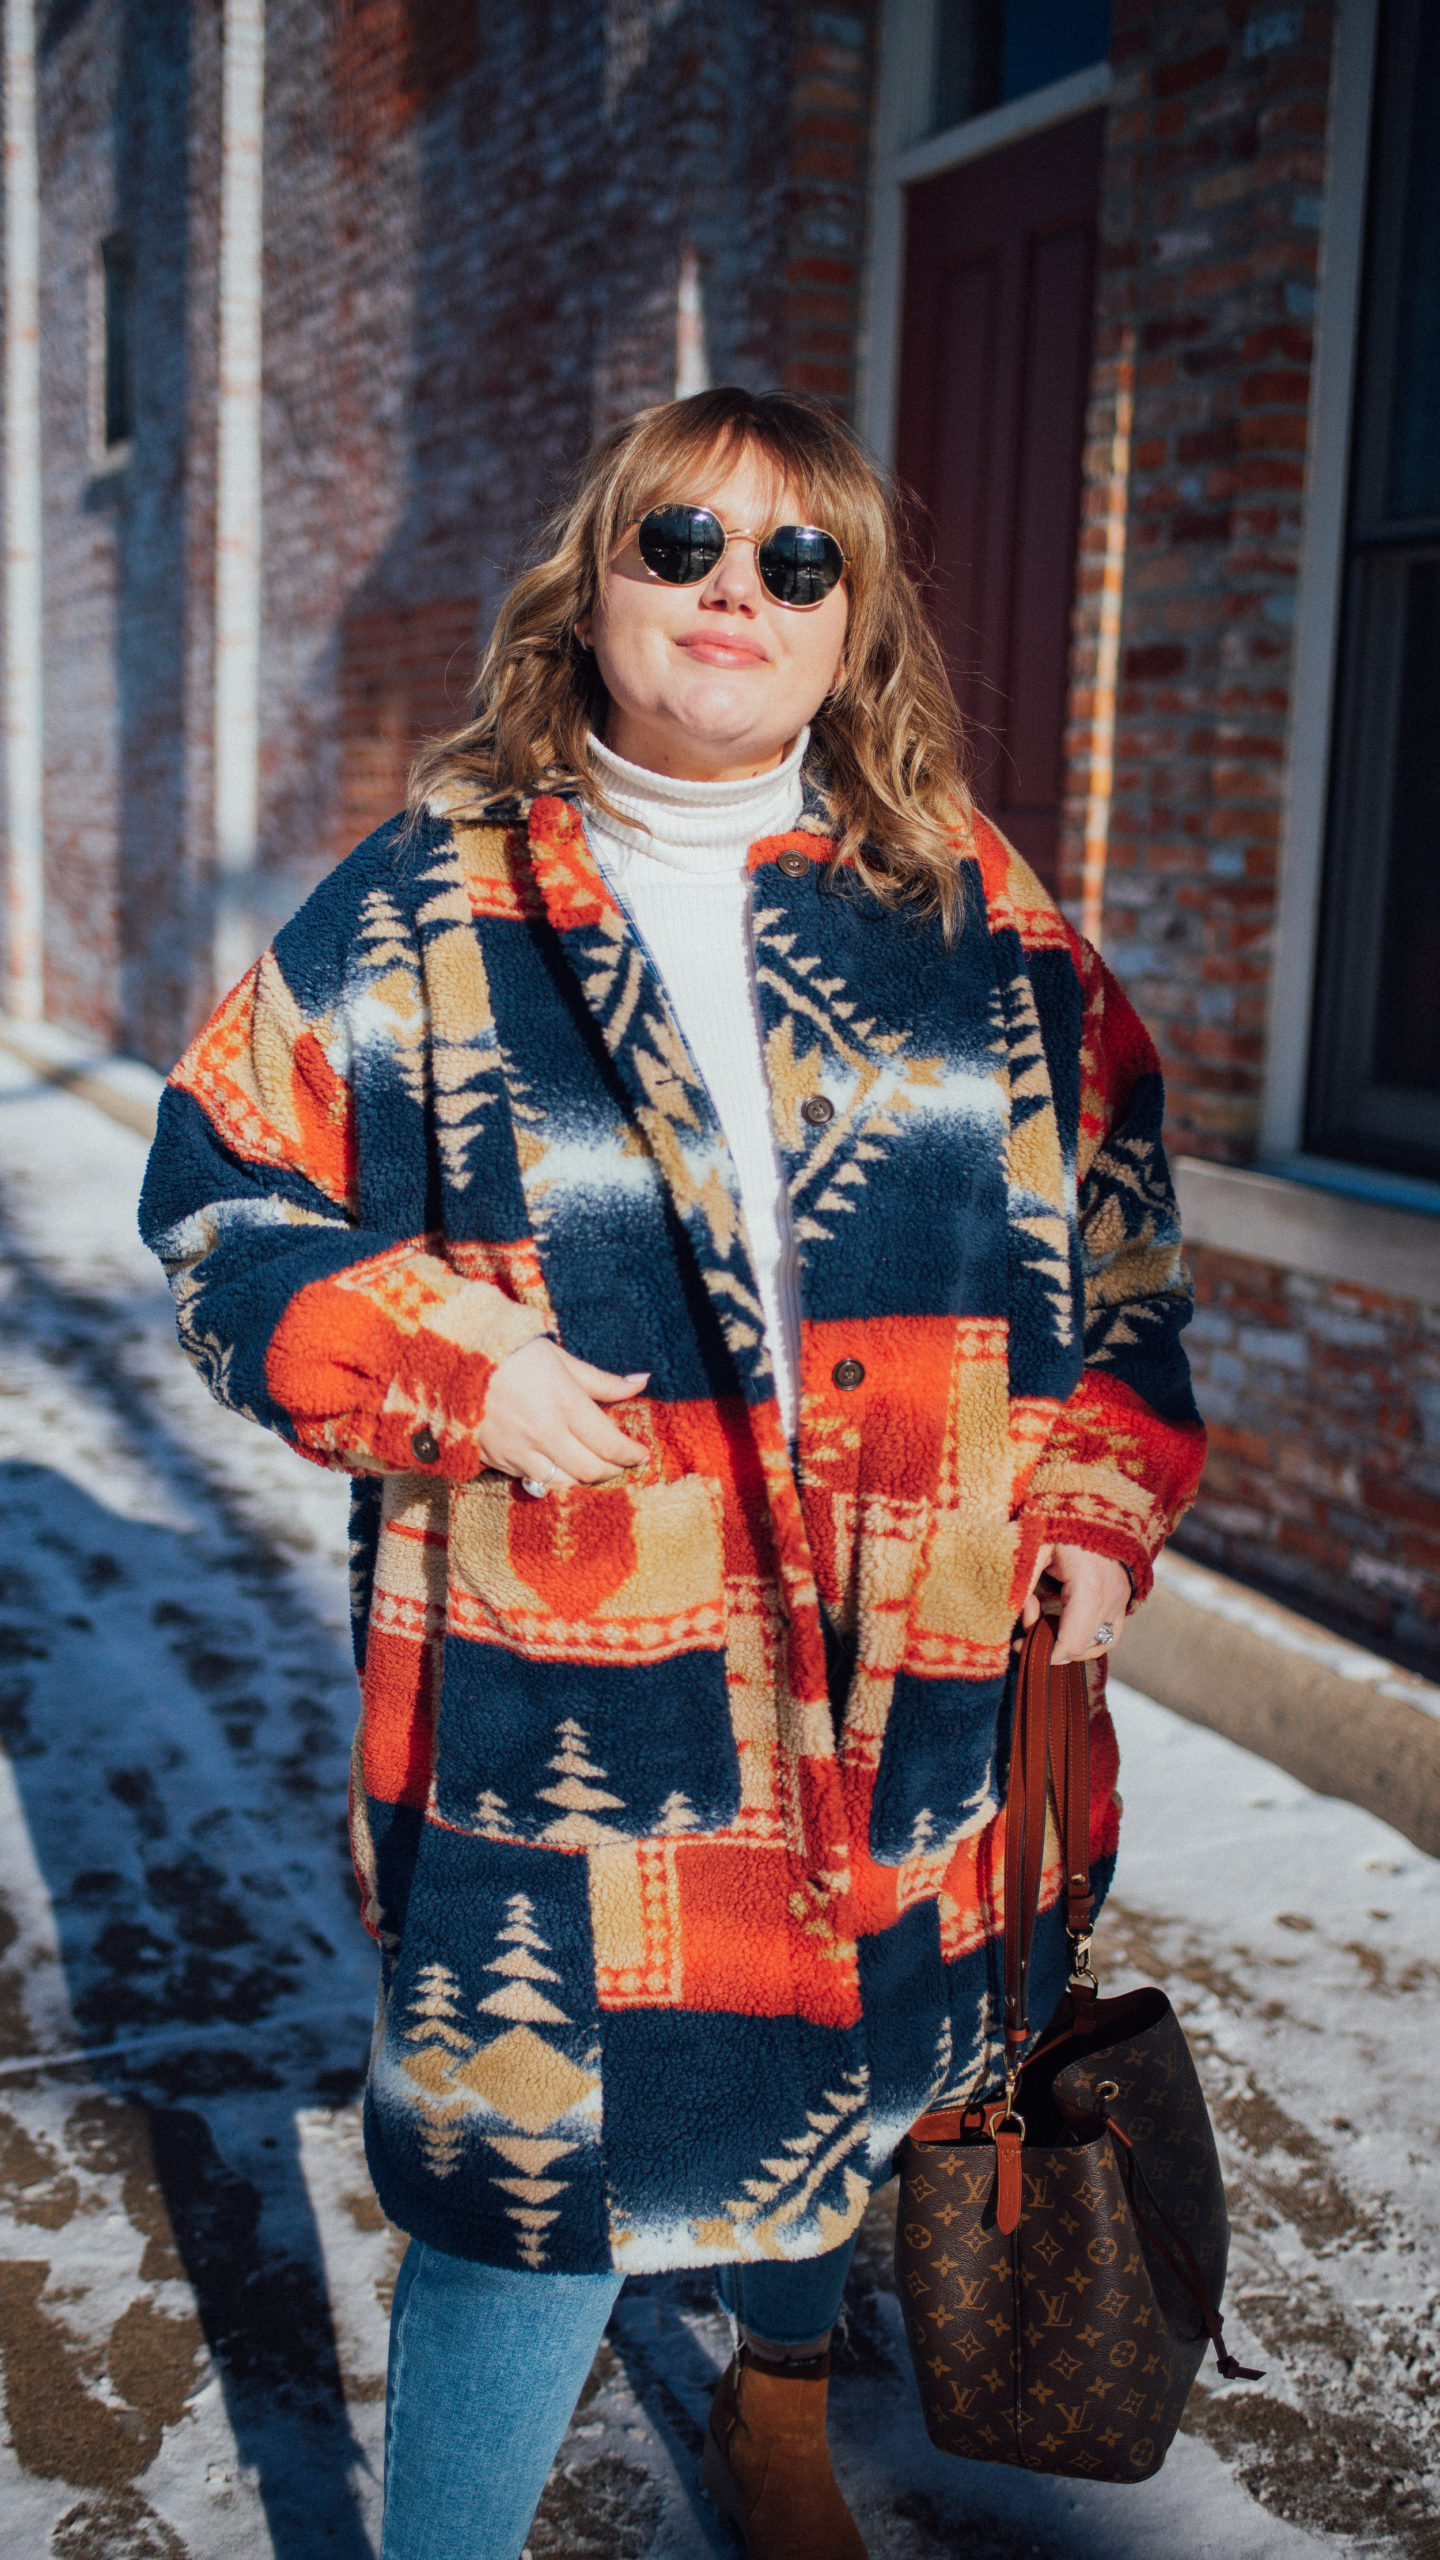 Sharing a cozy  sherpa outfit for the coldest of winter days! Staying warm and looking cute in plus size winter items from Anthropologie!